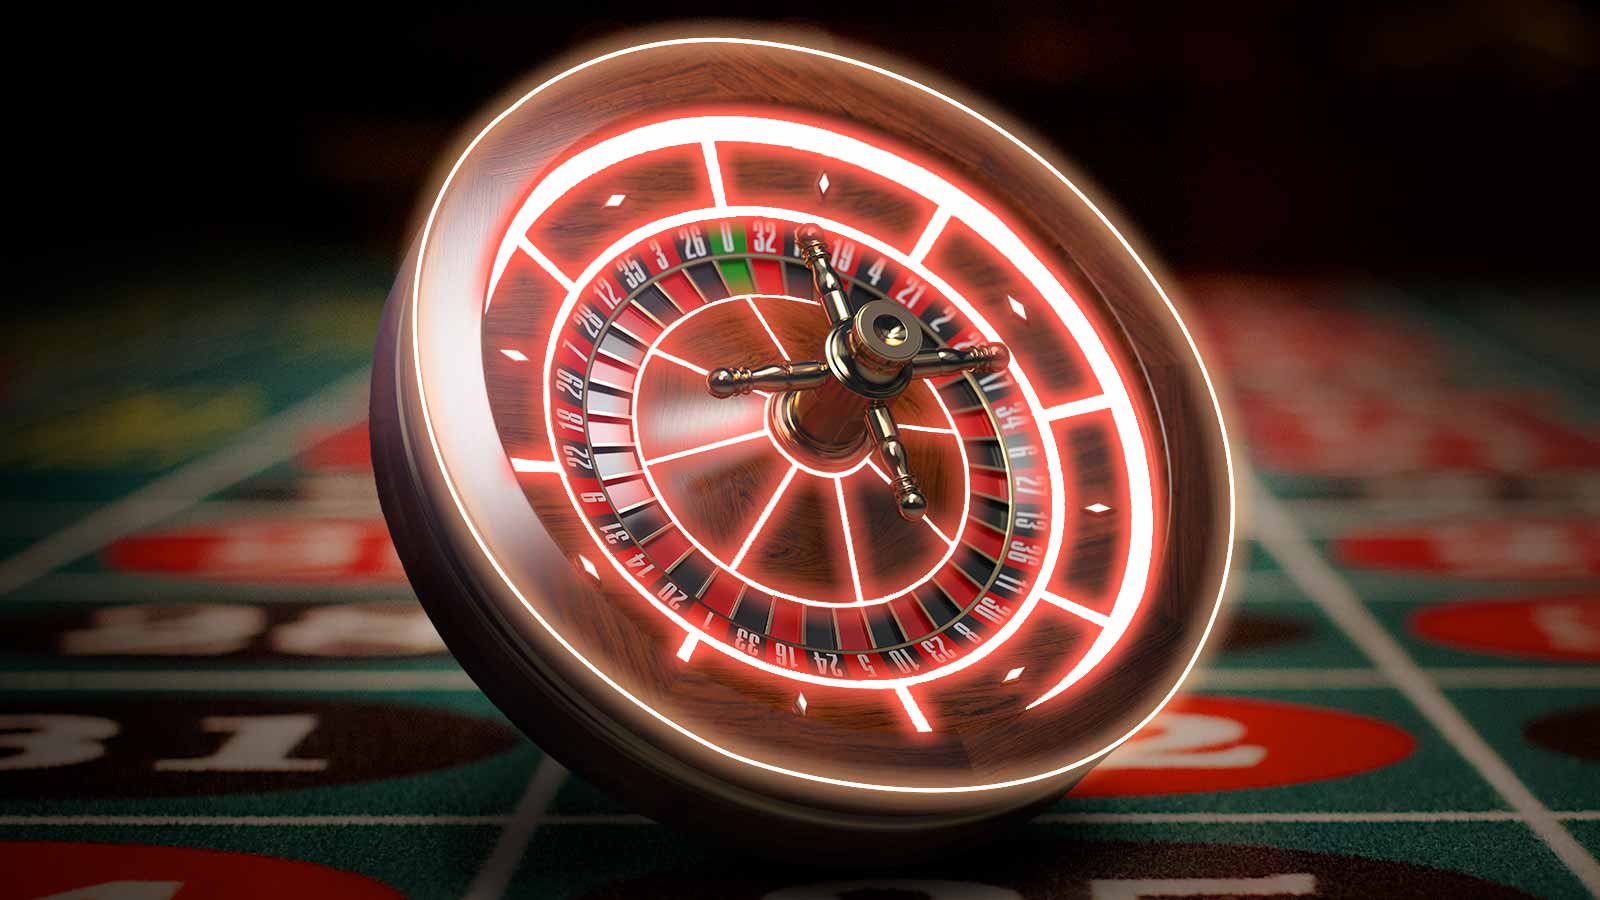 How To Find The Time To play casino gumatjcorporation.com On Google